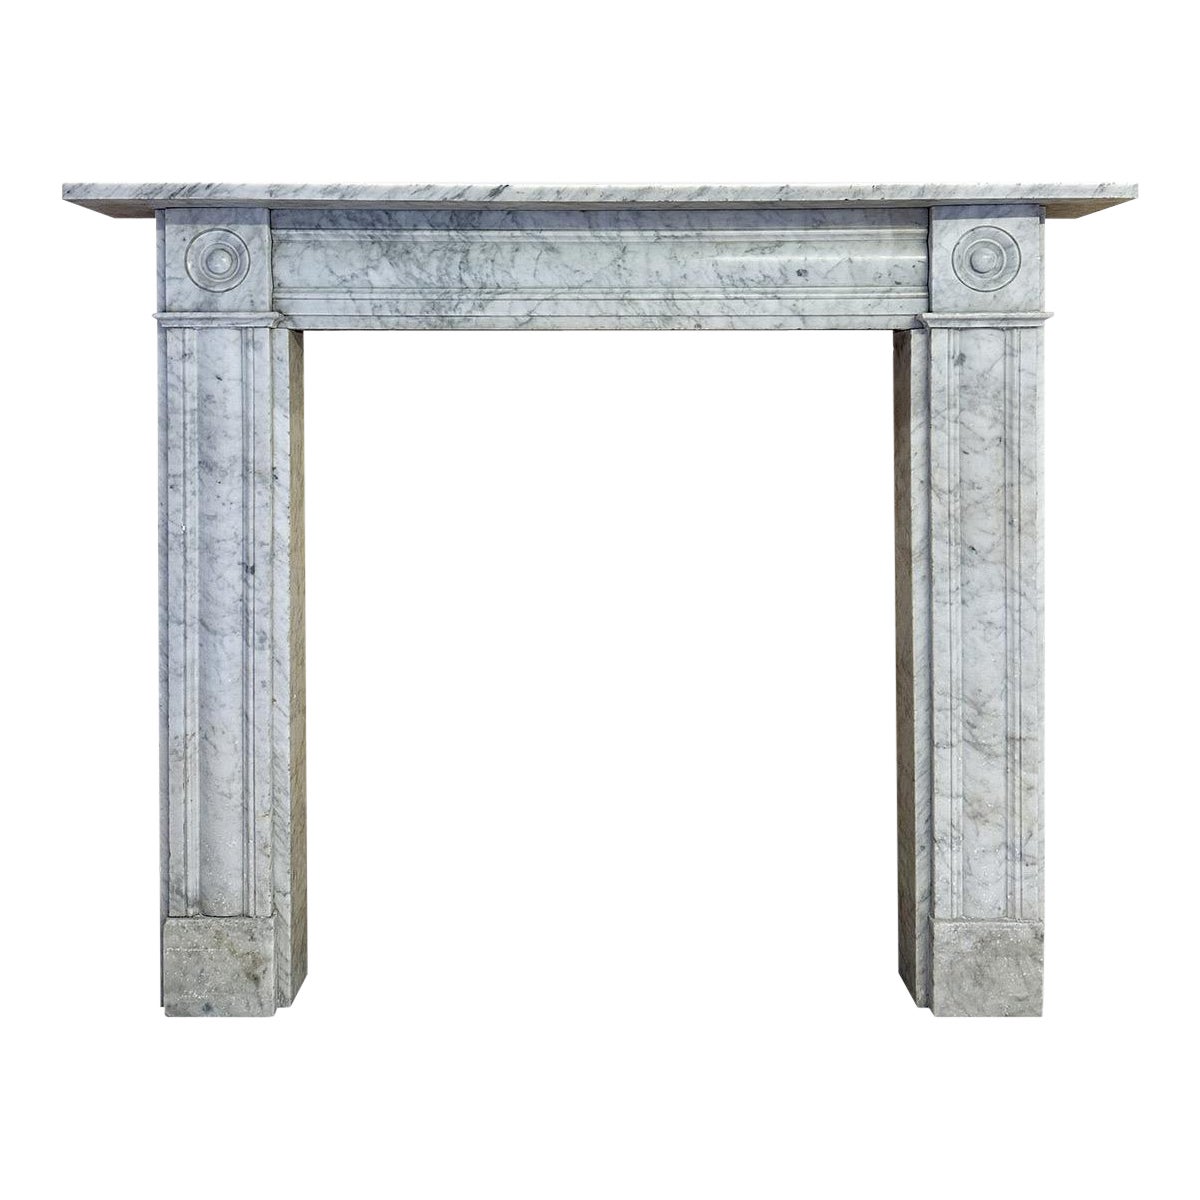 An English Antique Regency Period Carrara Marble Fireplace Mantel For Sale